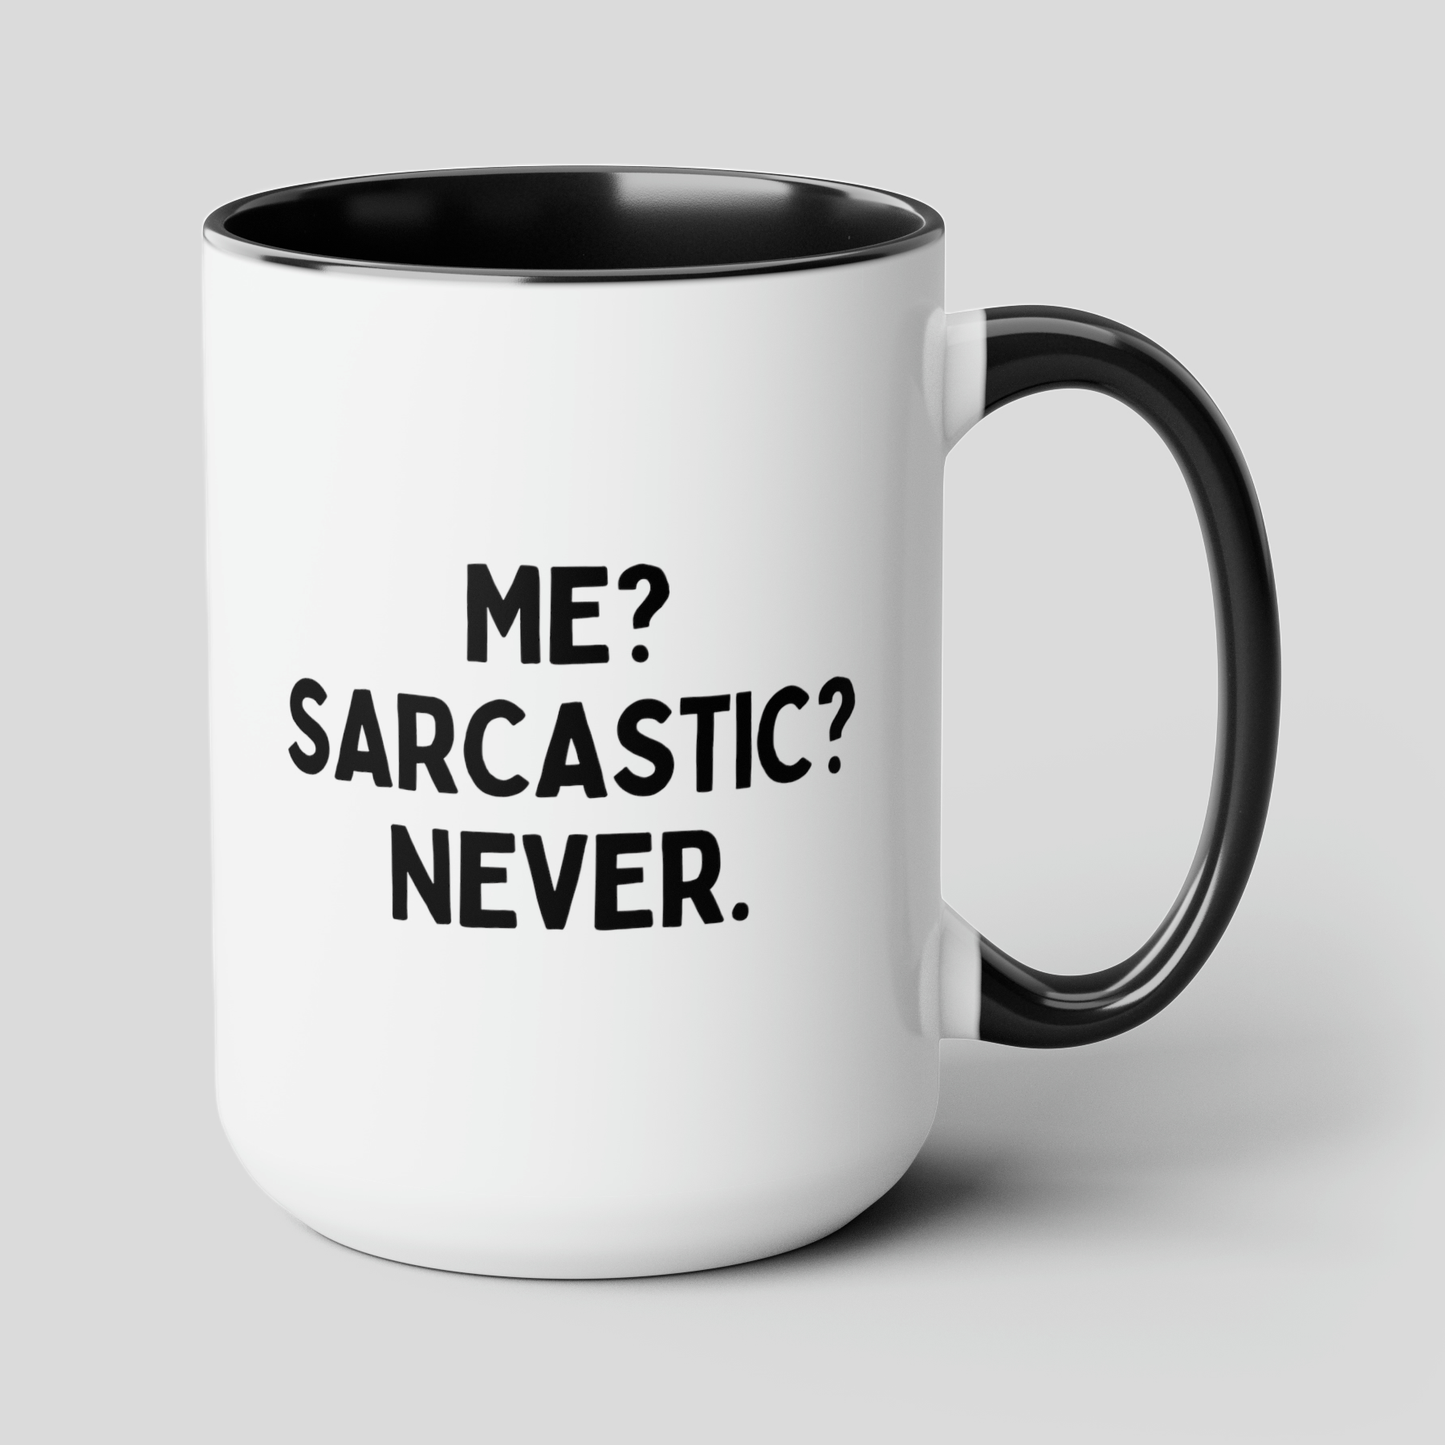 Me? Sarcastic? Never 15oz white with black accent funny large coffee mug gift for boyfriend dad mom best friend sassy adult humor sarcasm waveywares wavey wares wavywares wavy wares cover